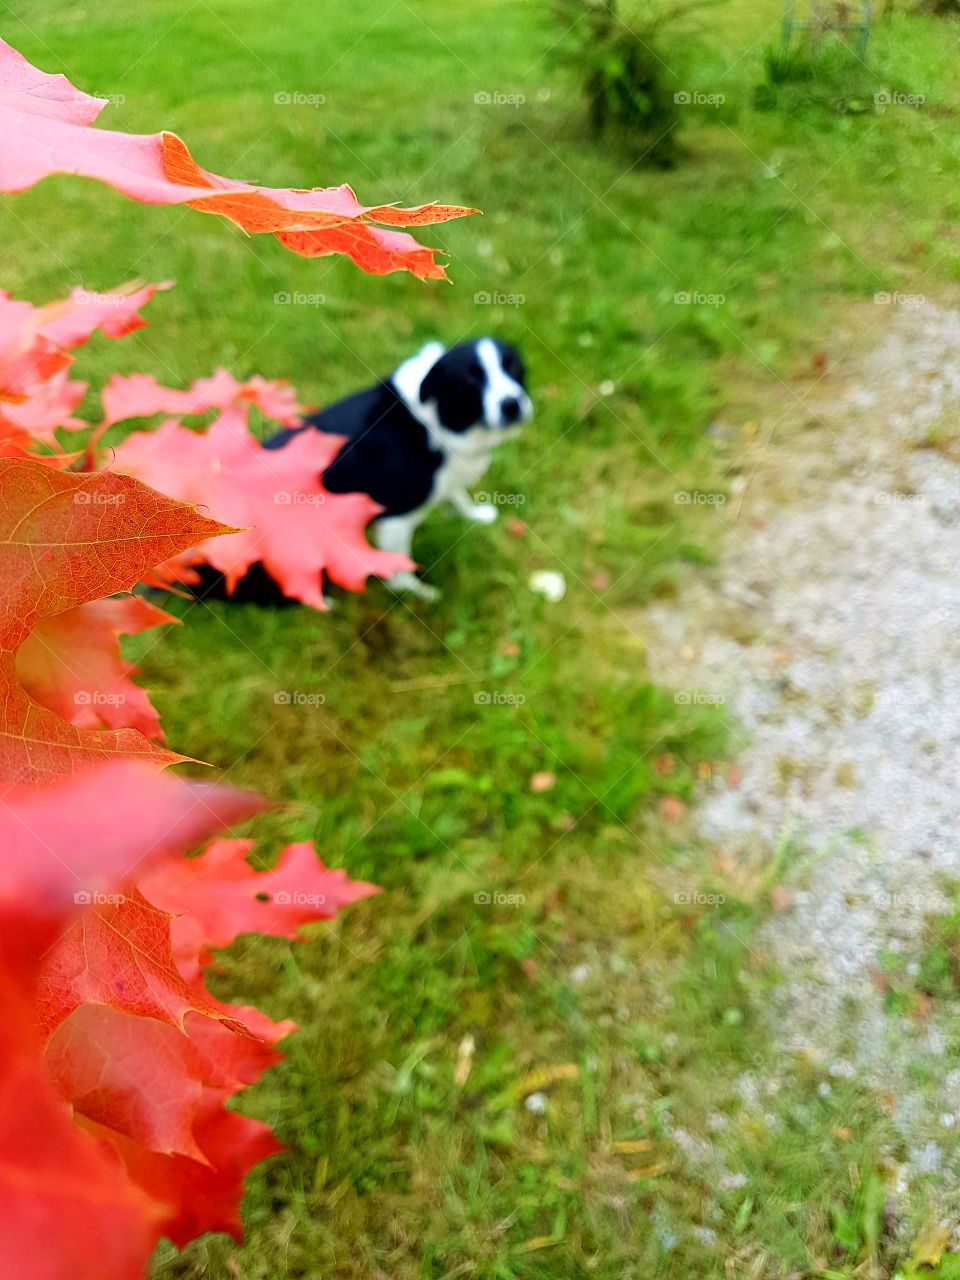 Growing tree and my dog in same picture